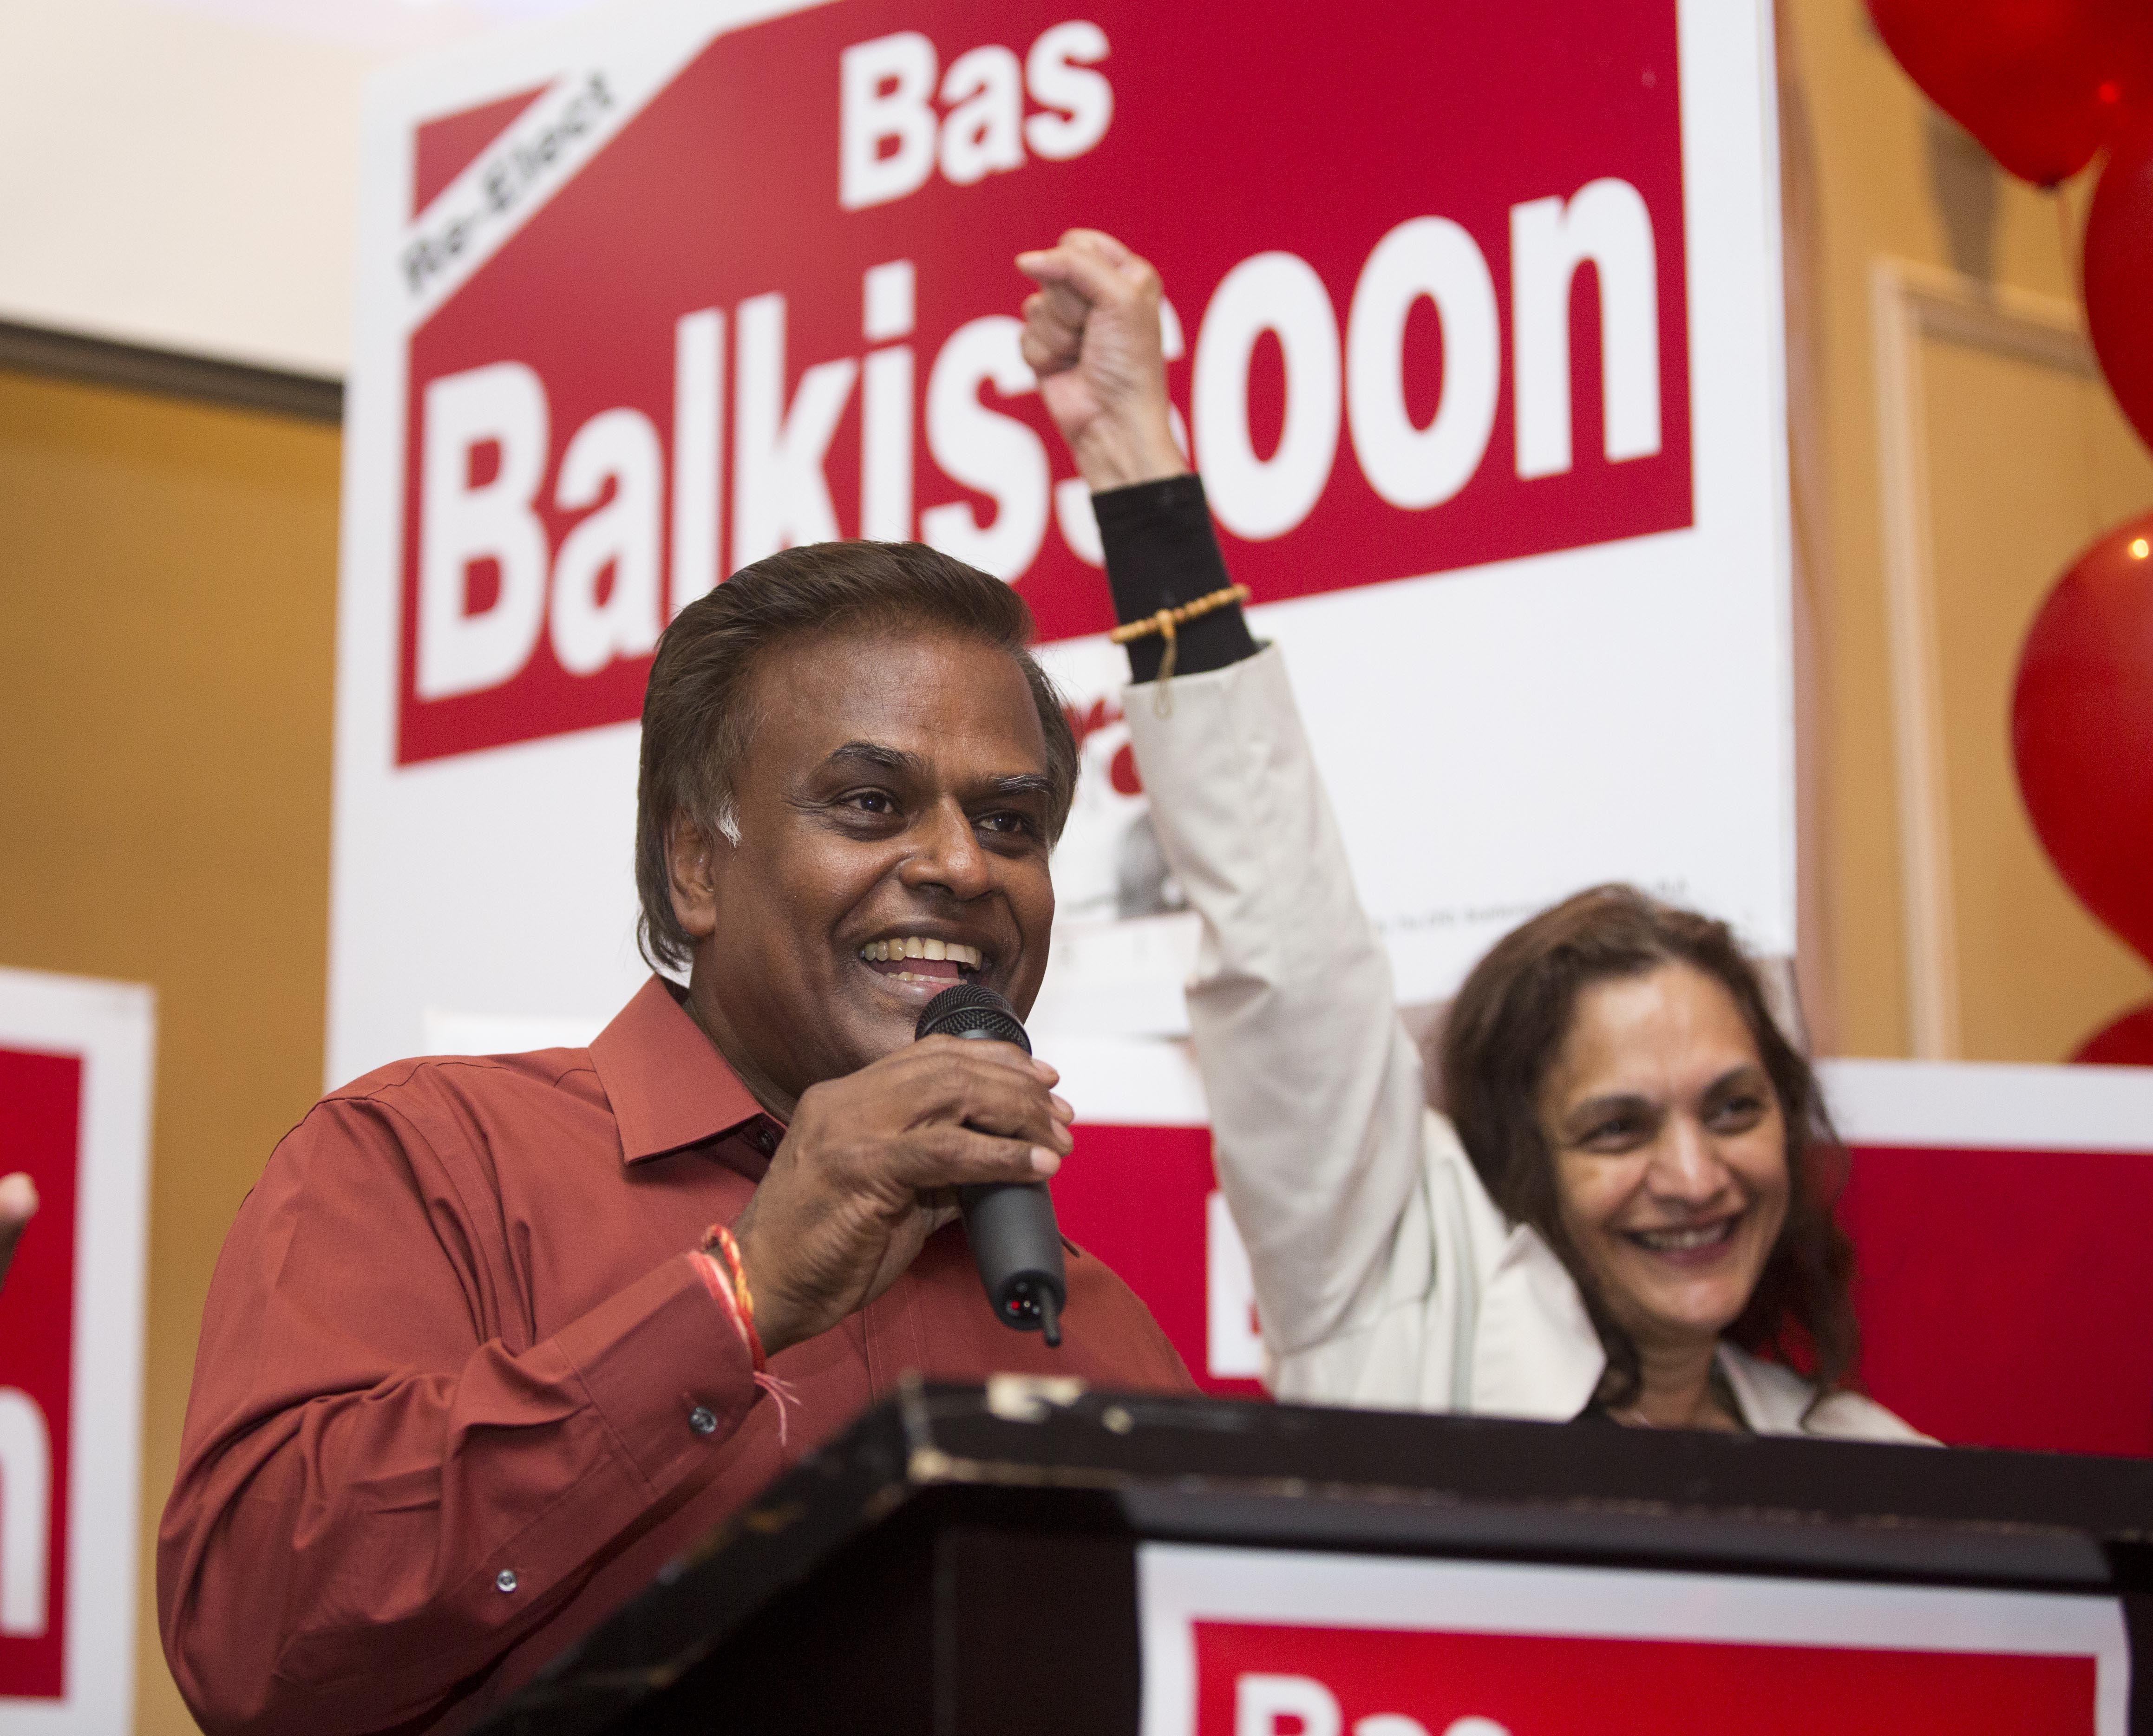 Bas Balkissoon celebrates his re-election at the Scarborough Convention Centre following the Ontario Provincial Election in 2014. | Source: Getty Images